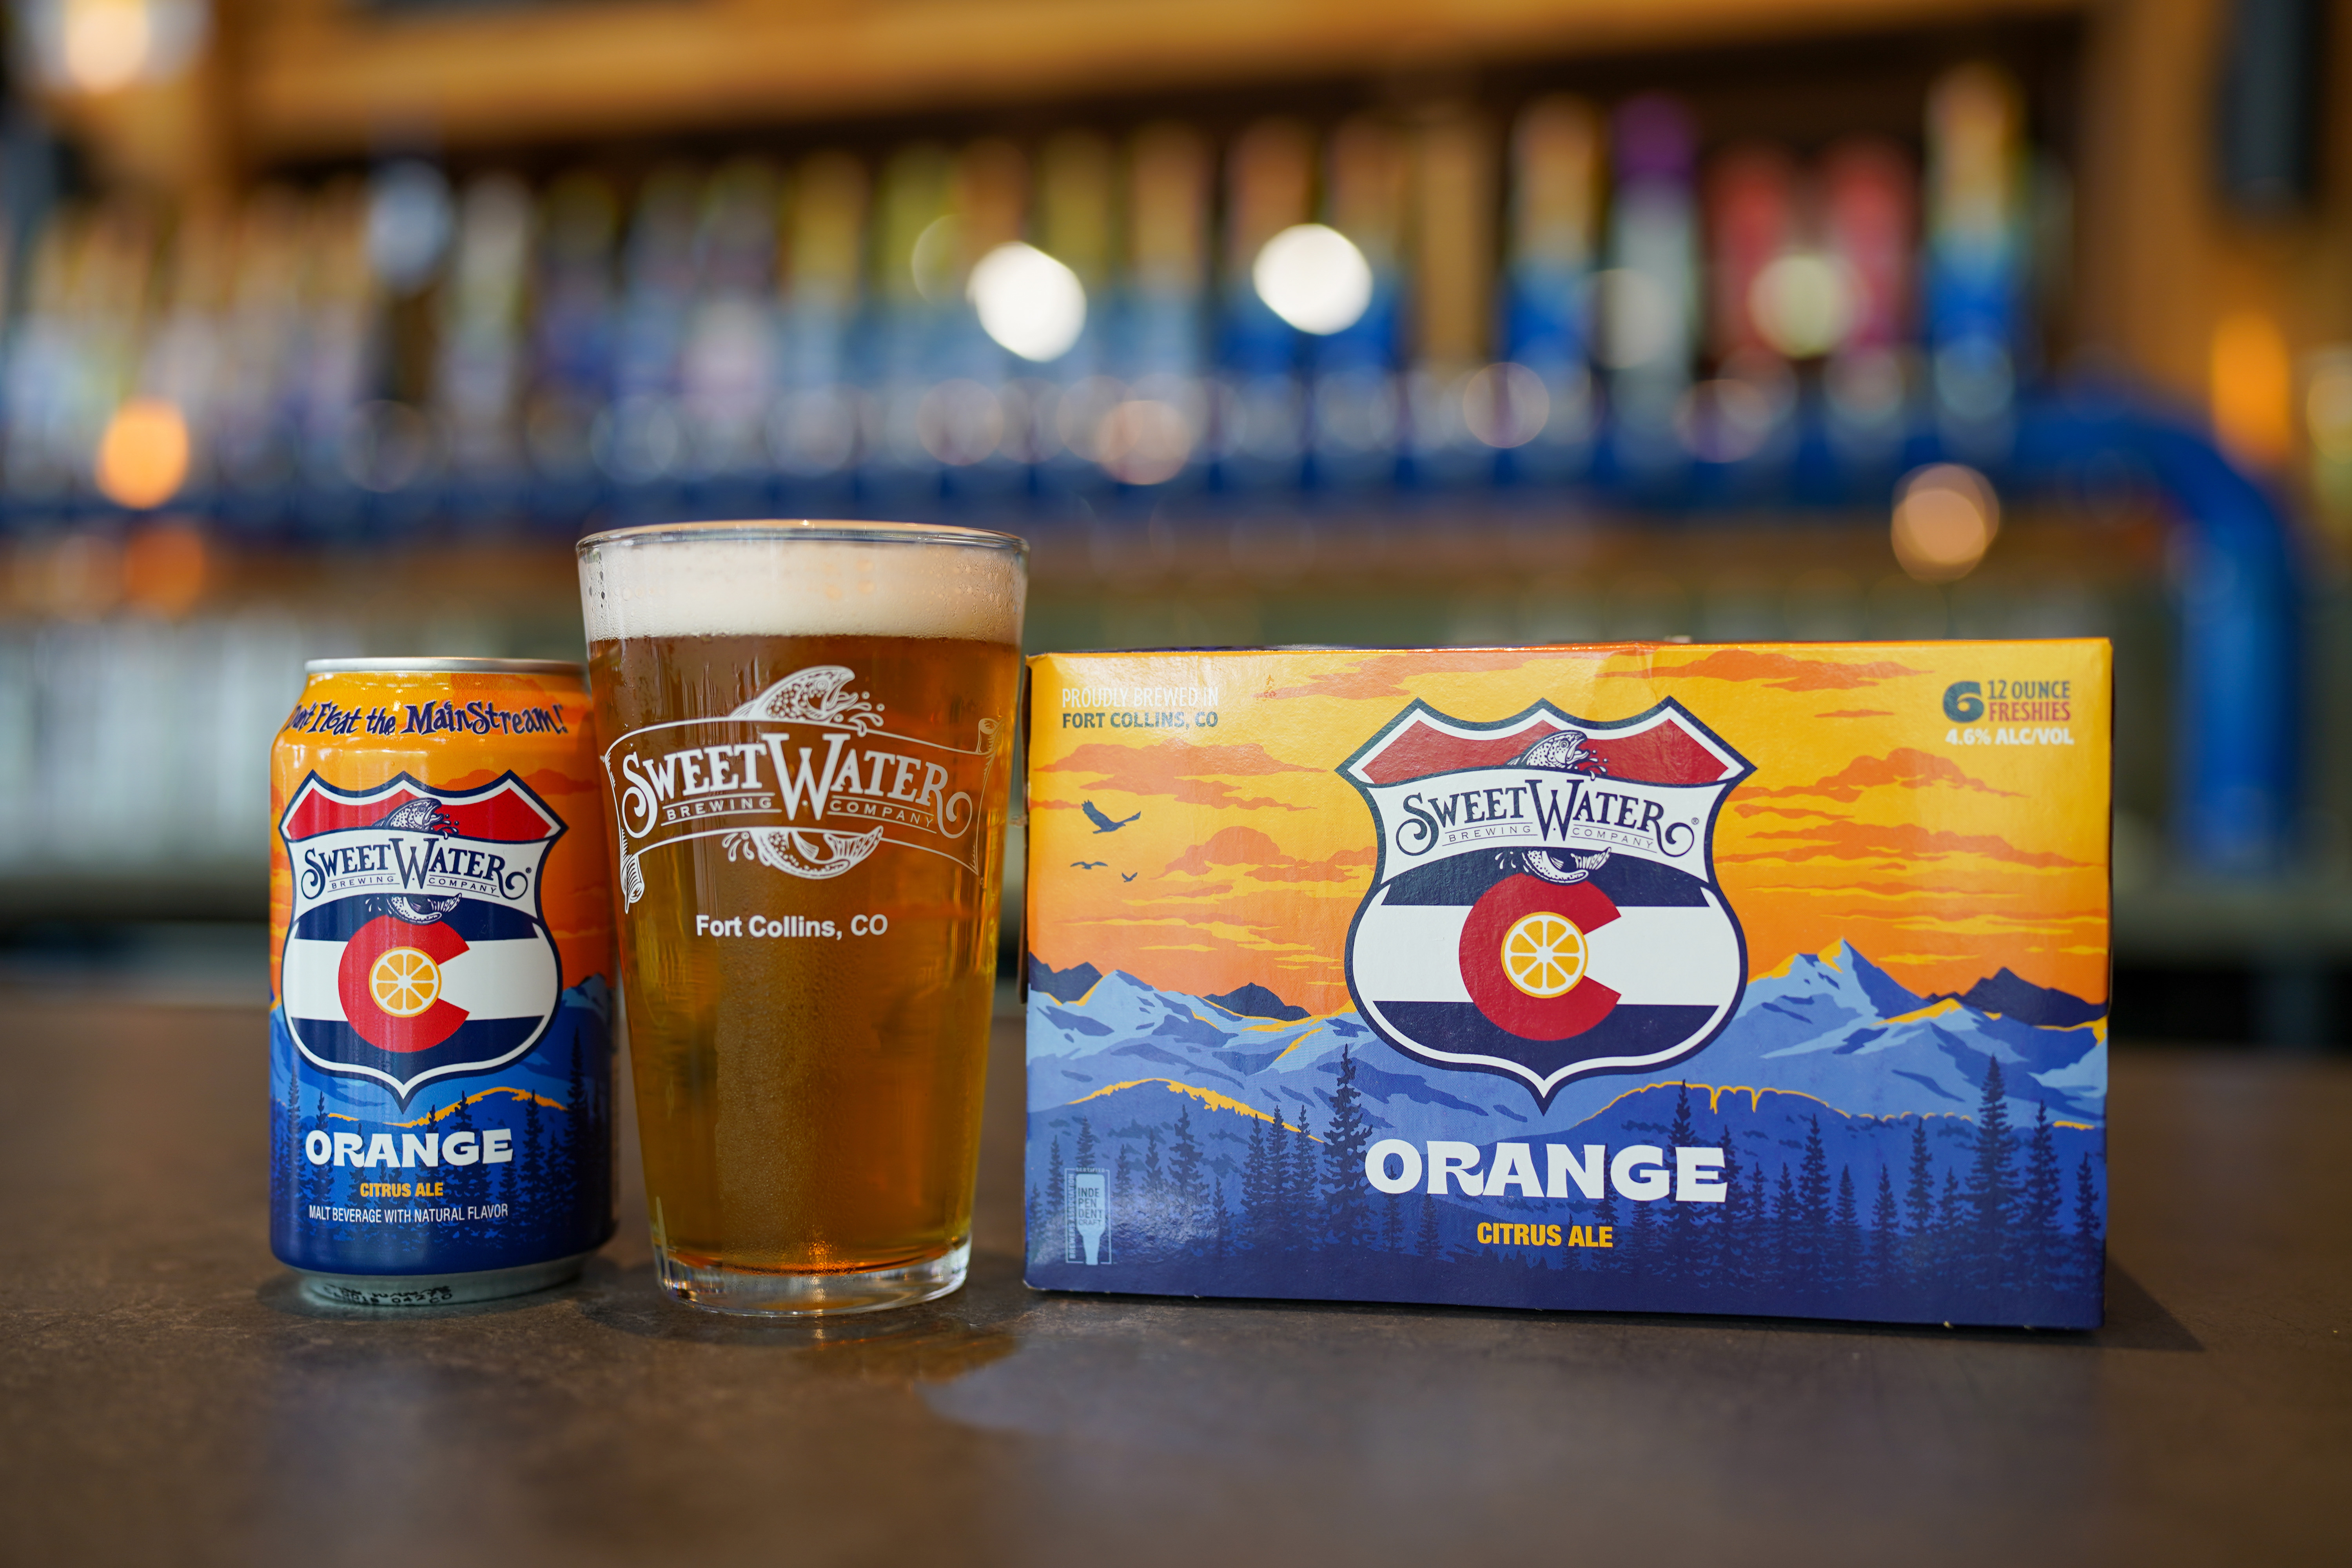 SweetWater ORANGE is brewed with Centennial hops and high-quality local wheat and craft malt from the Root Shoot Malting family farm in Loveland, Colorado. It is also infused with natural orange flavor for an especially easy-drinking experience. Pictured is the brand new 6-pack.